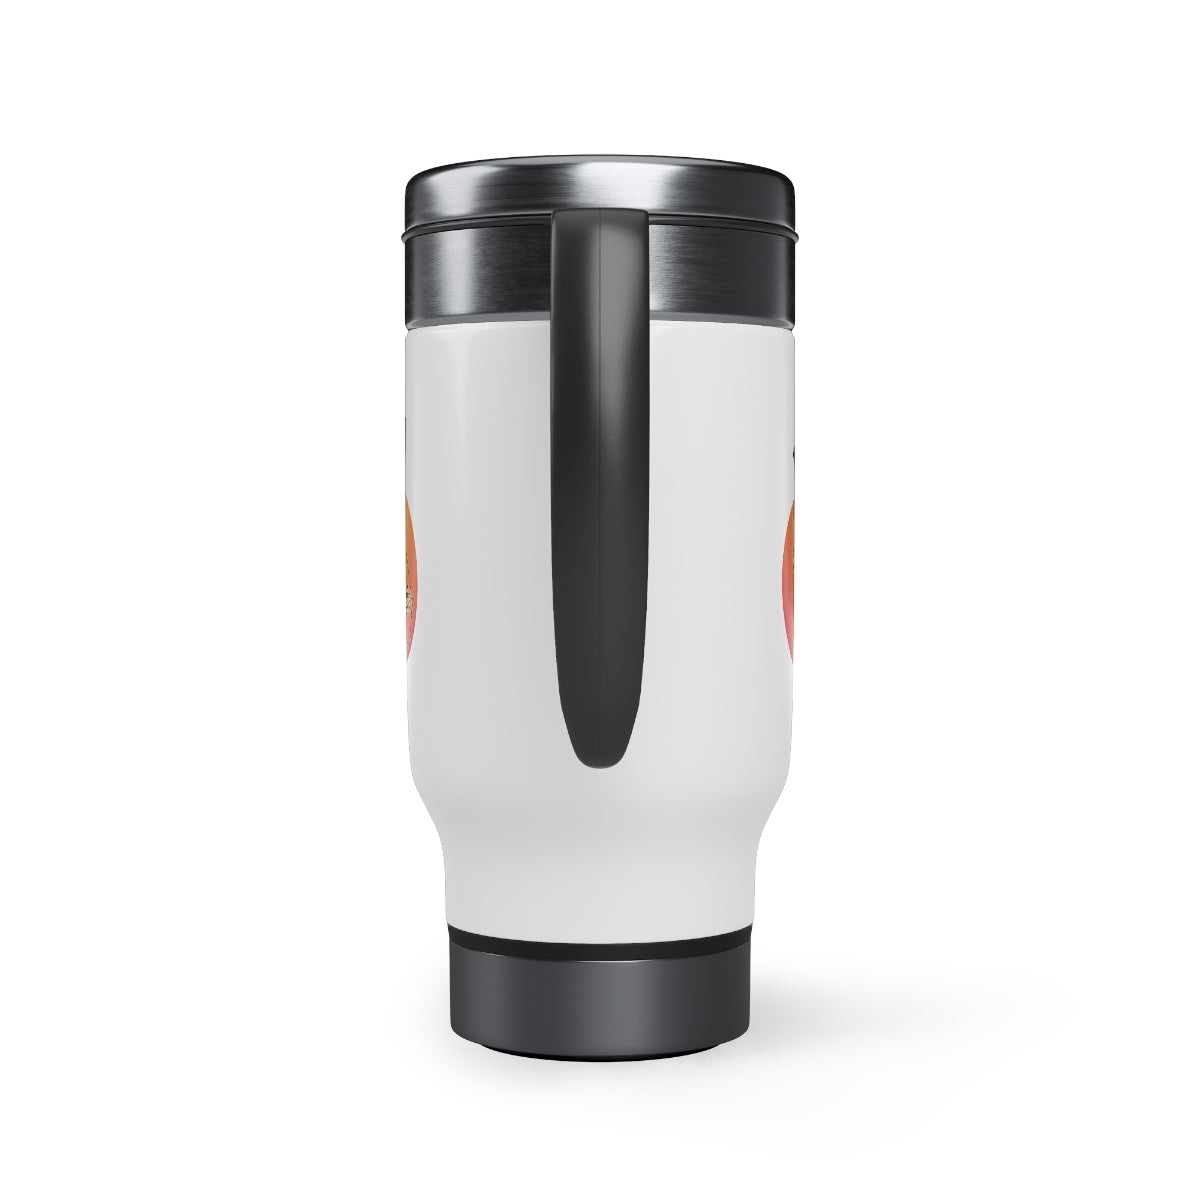 Lilly Georgia Stainless Steel Travel Mug with Handle, 14oz